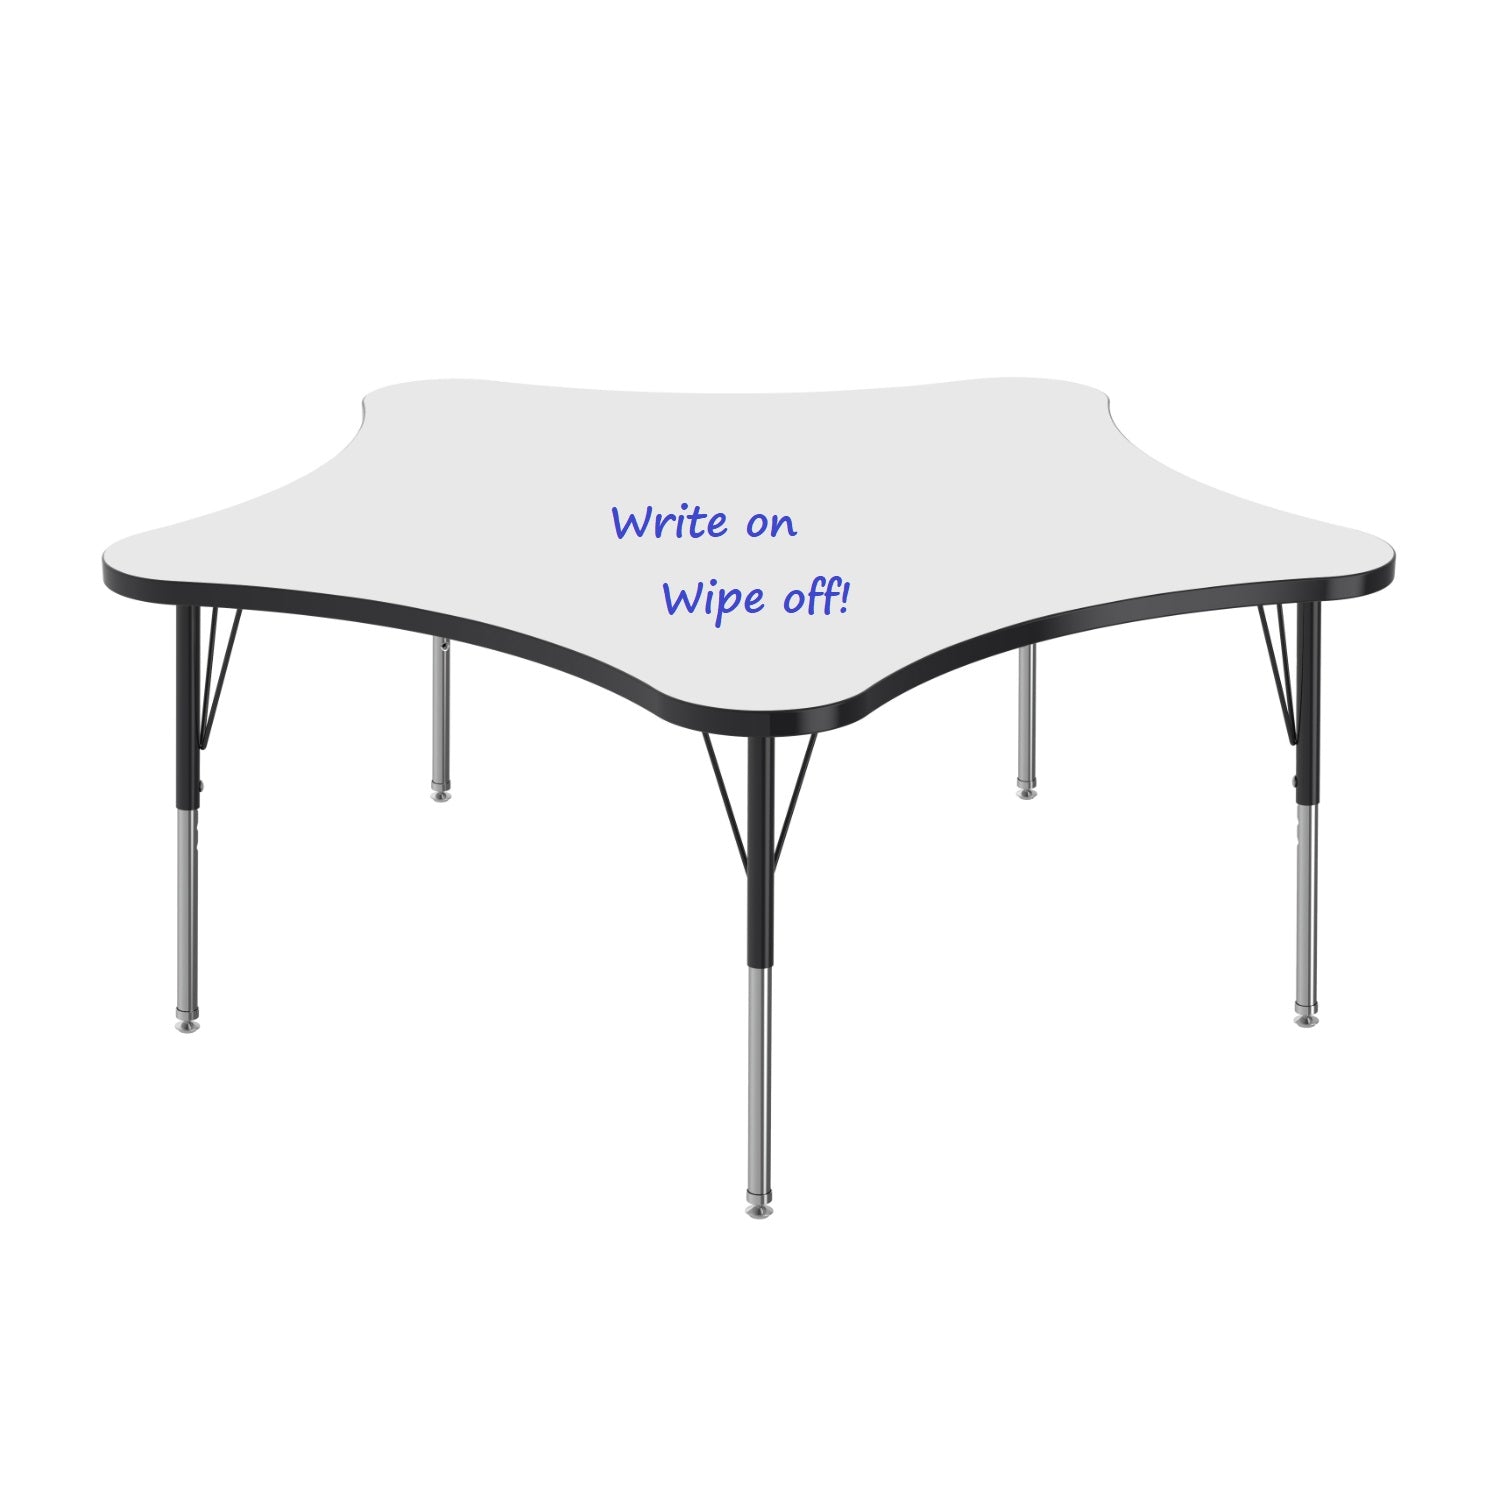 MG Series Adjustable Height Activity Table with White Dry Erase Markerboard Top, 60" 5-Star